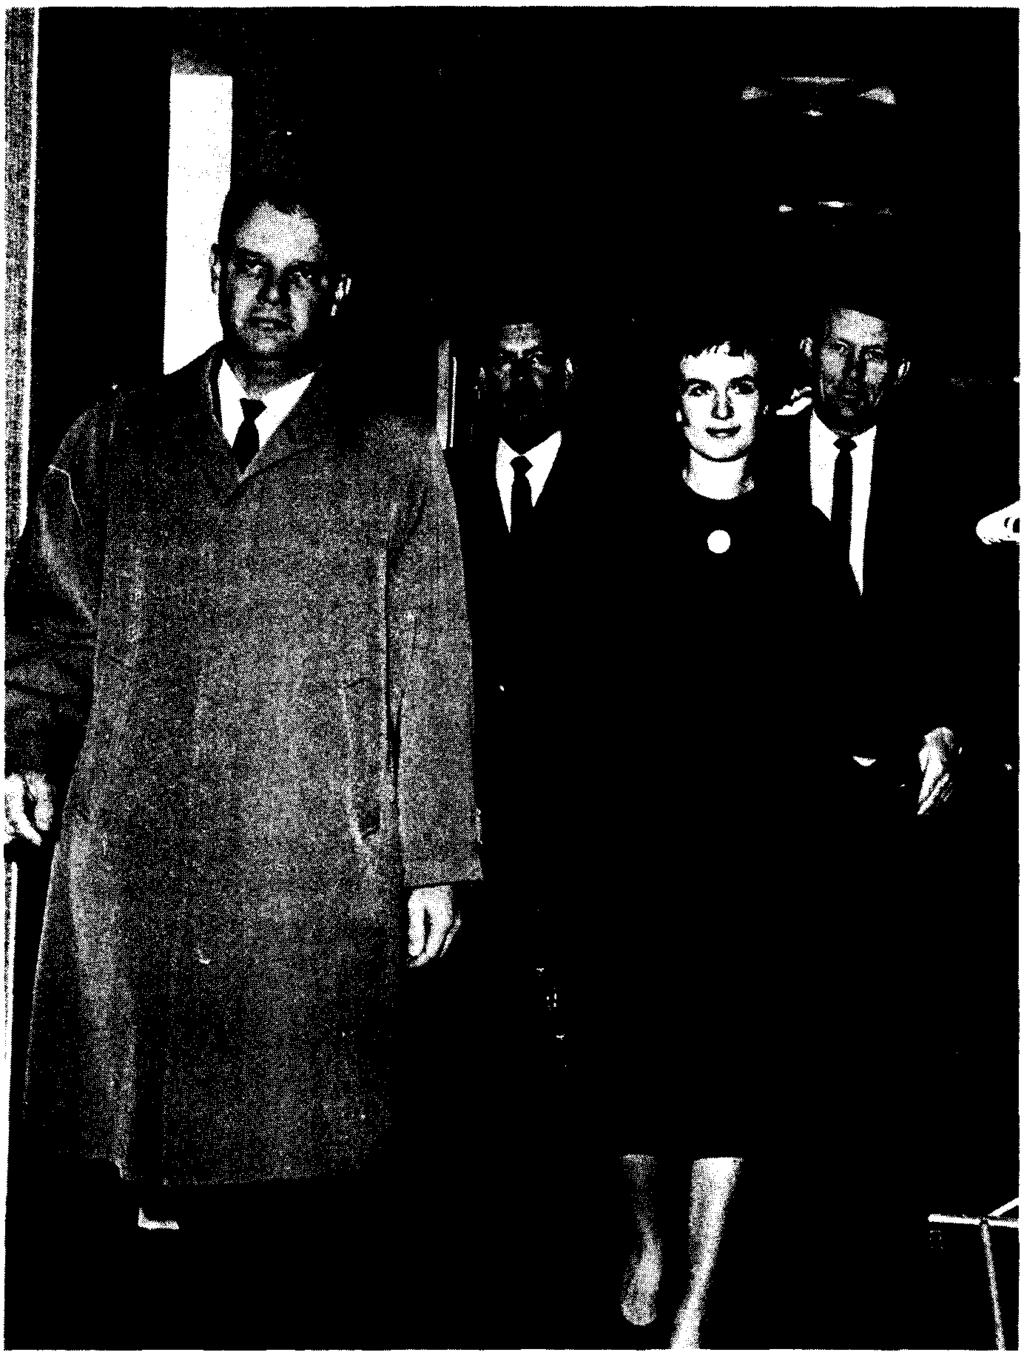 Marina Oswald, widow of supposed assassin Lee Harvey Oswald, being